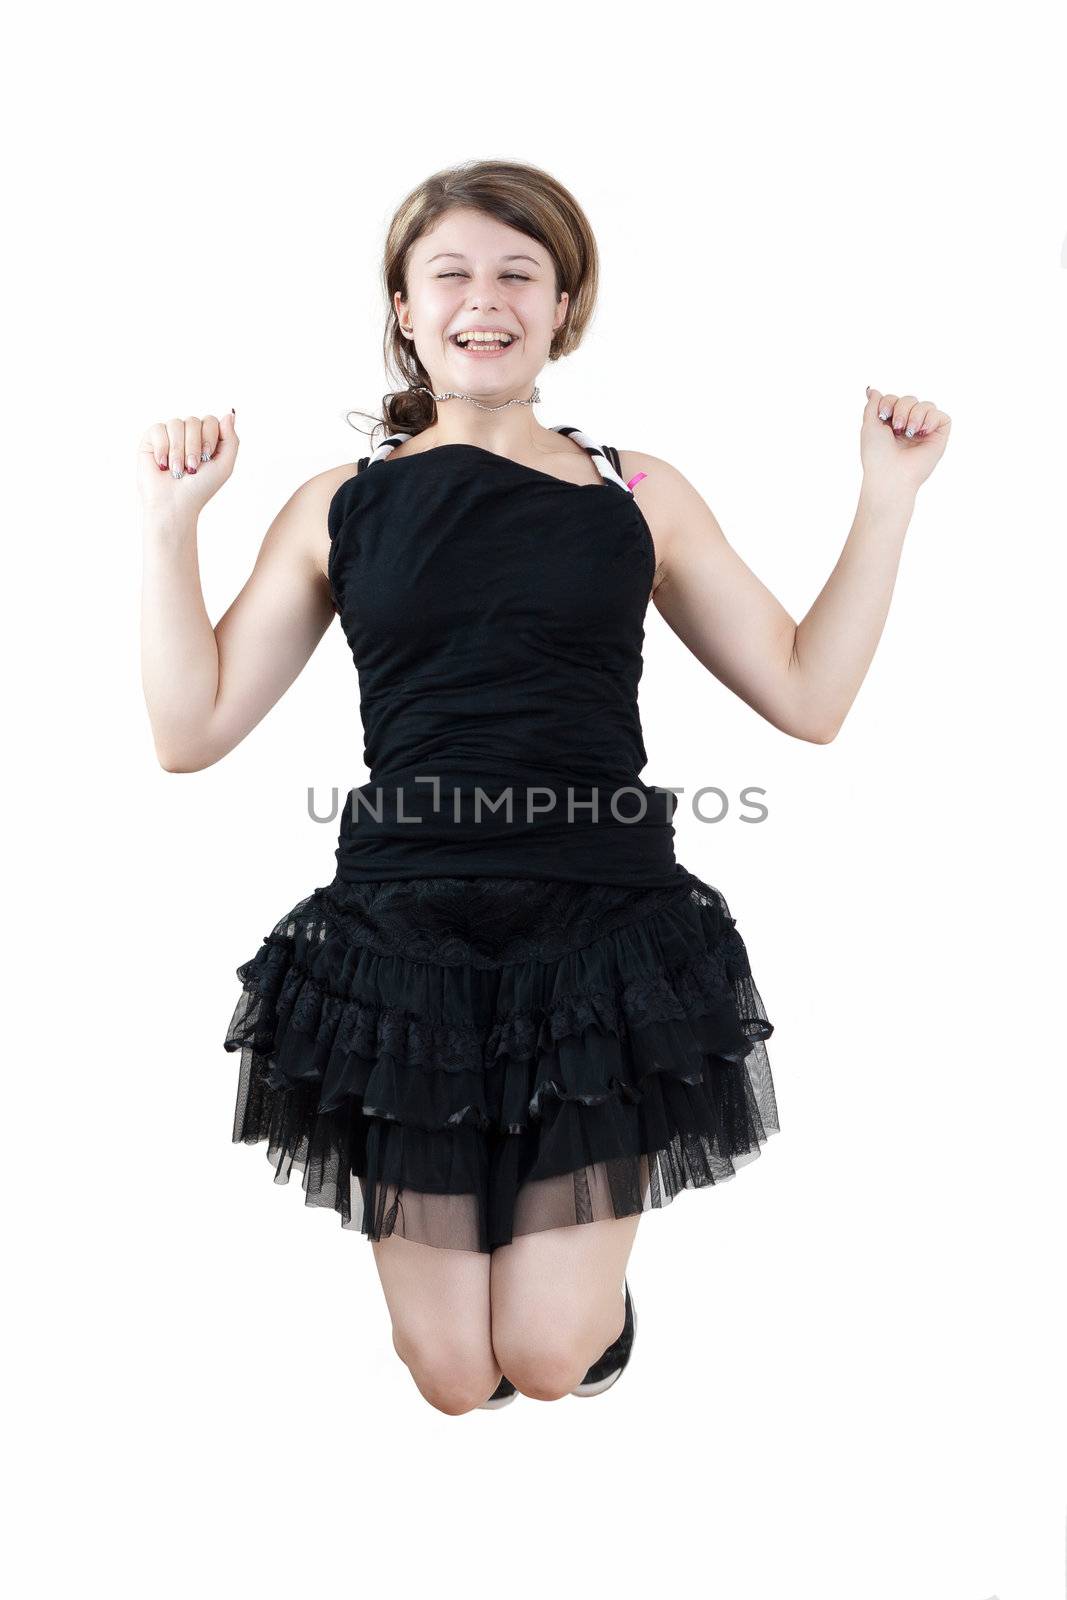 Winning success woman happy ecstatic celebrating being a winner. All on white Background.